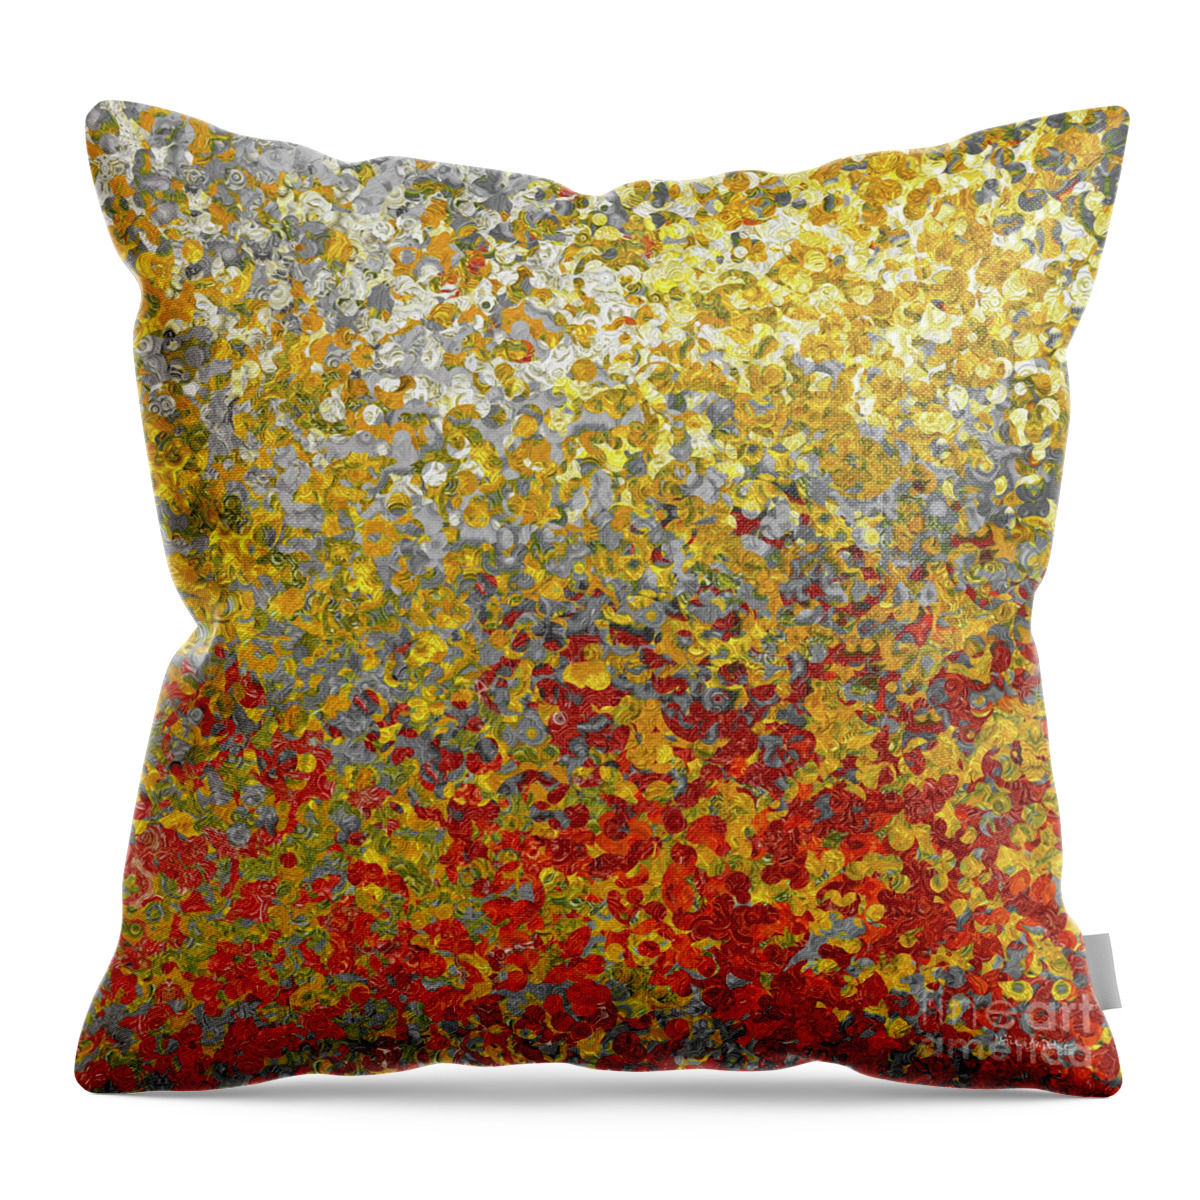 Red Throw Pillow featuring the painting Matthew 3 15. Fulfill All Righteousness by Mark Lawrence